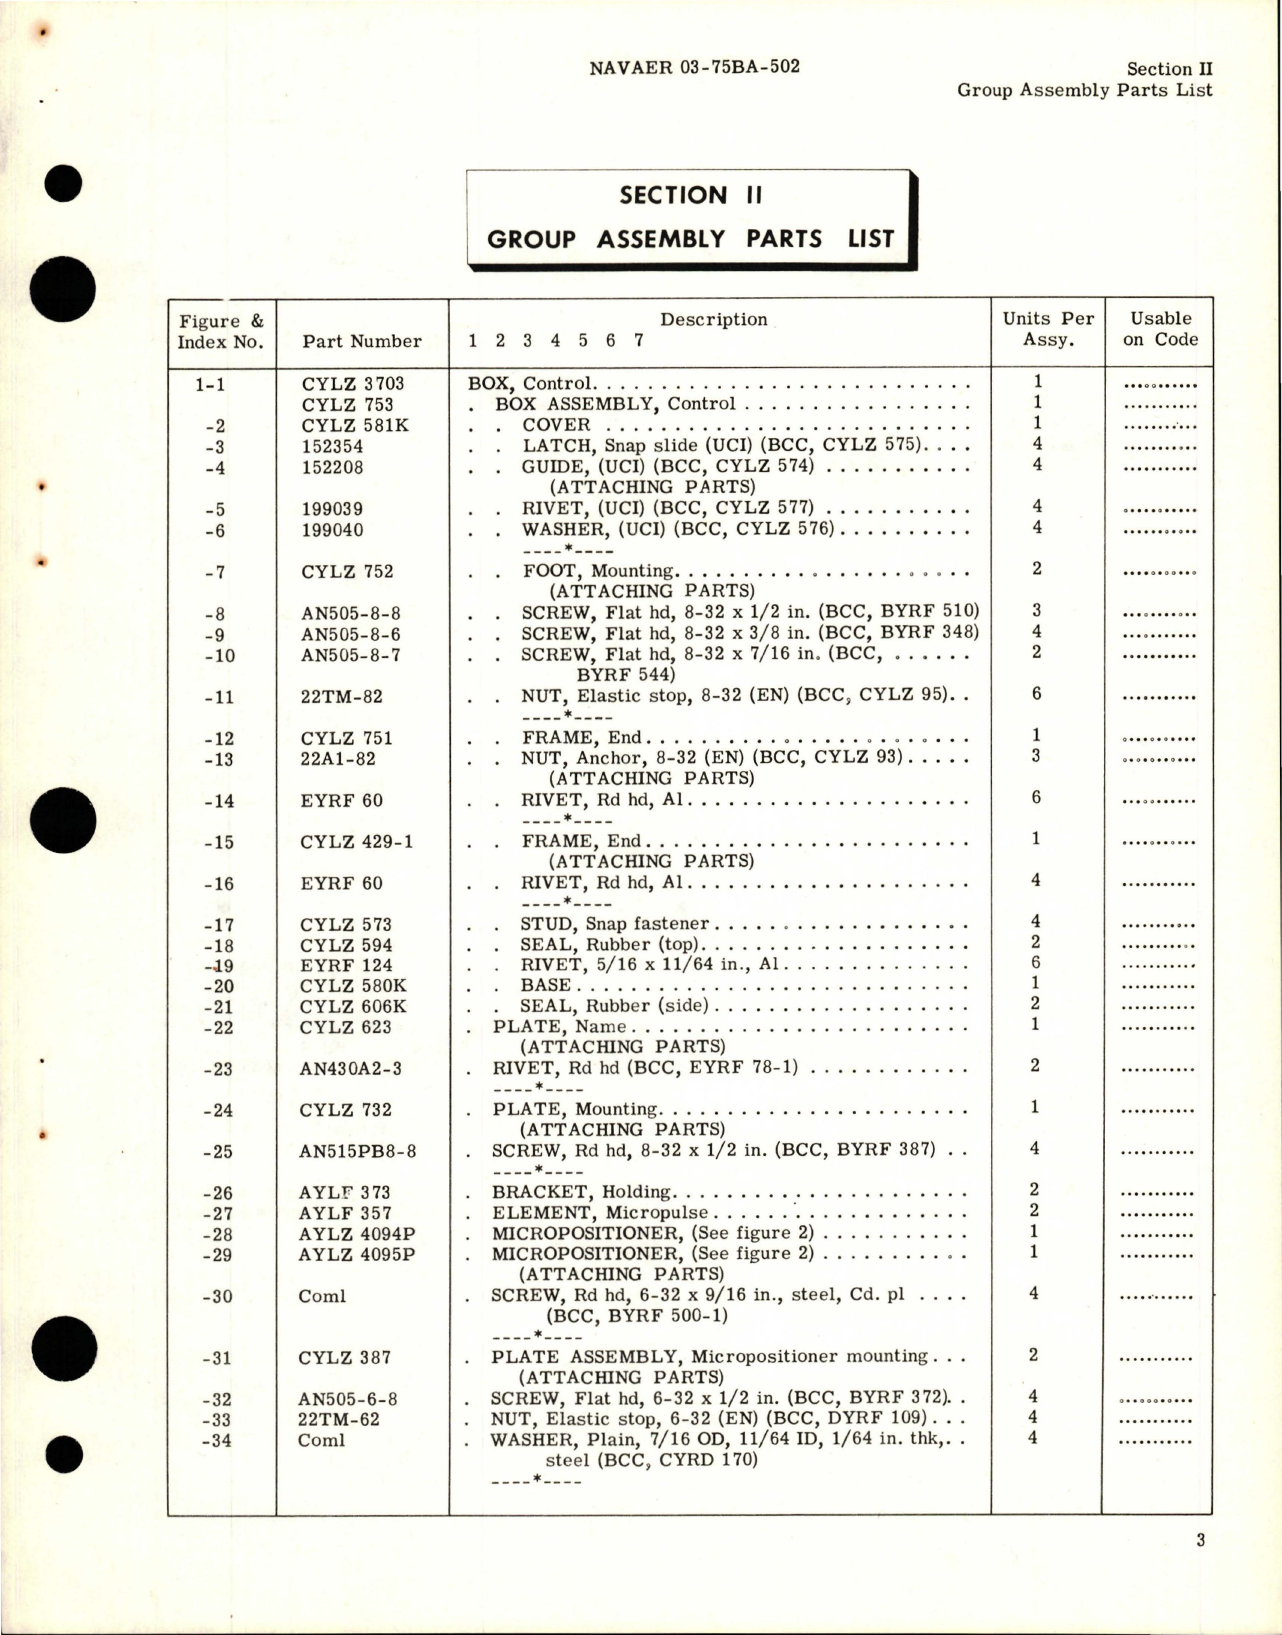 Sample page 7 from AirCorps Library document: Illustrated Parts Breakdown for Aircraft Temperature Control System Control Box, Parts CYLZ 3703 and CYLZ 3609